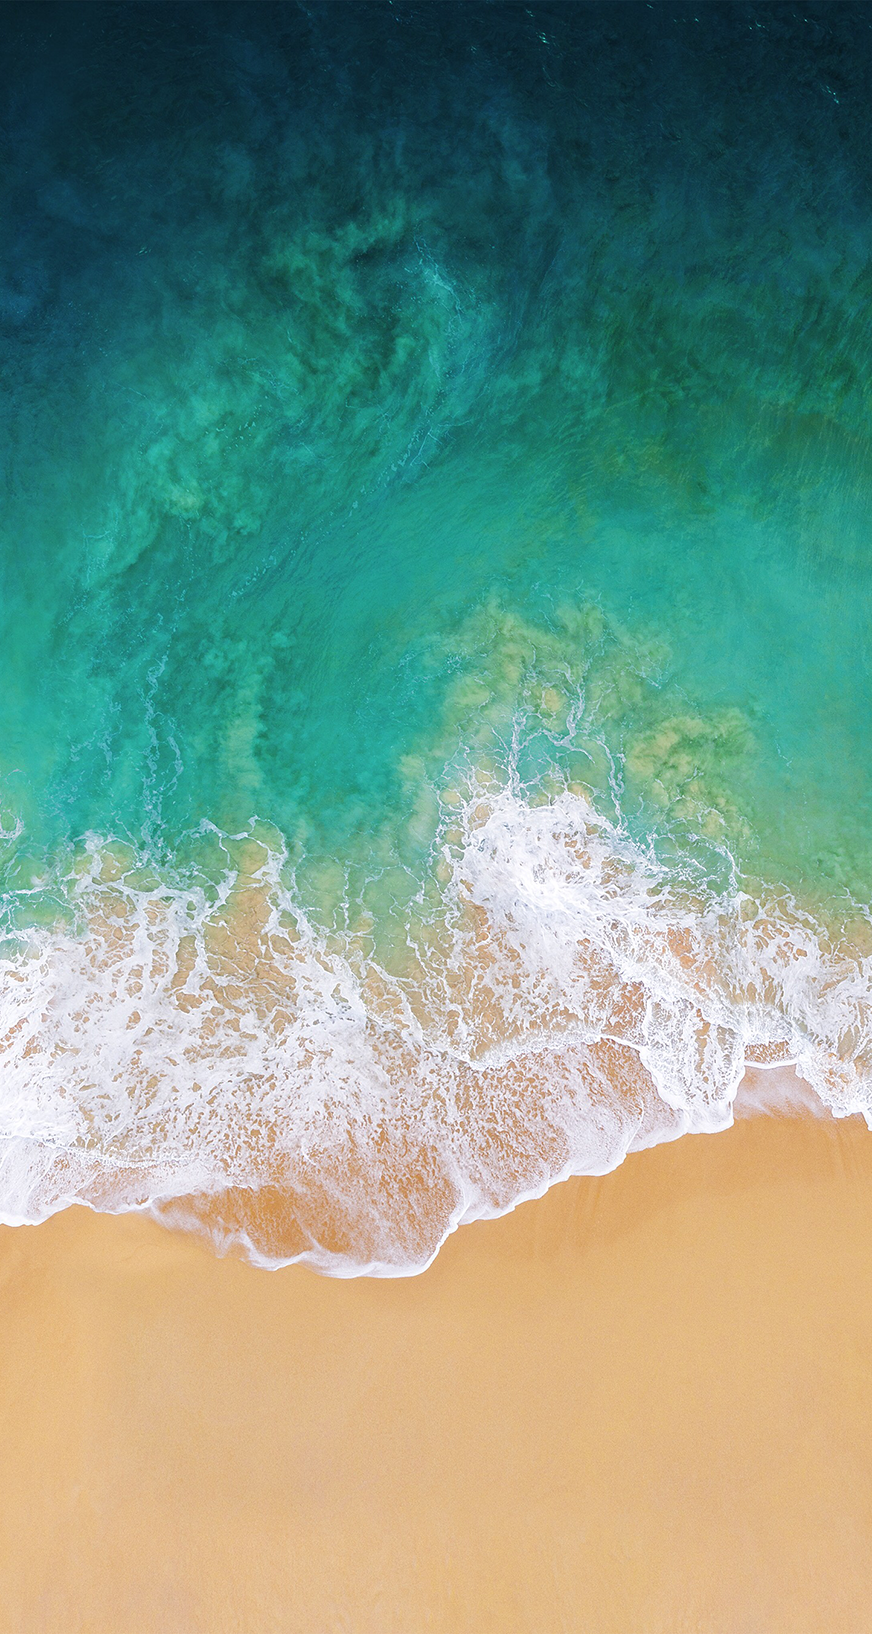 iOS 11 Wallpaper for iPhone